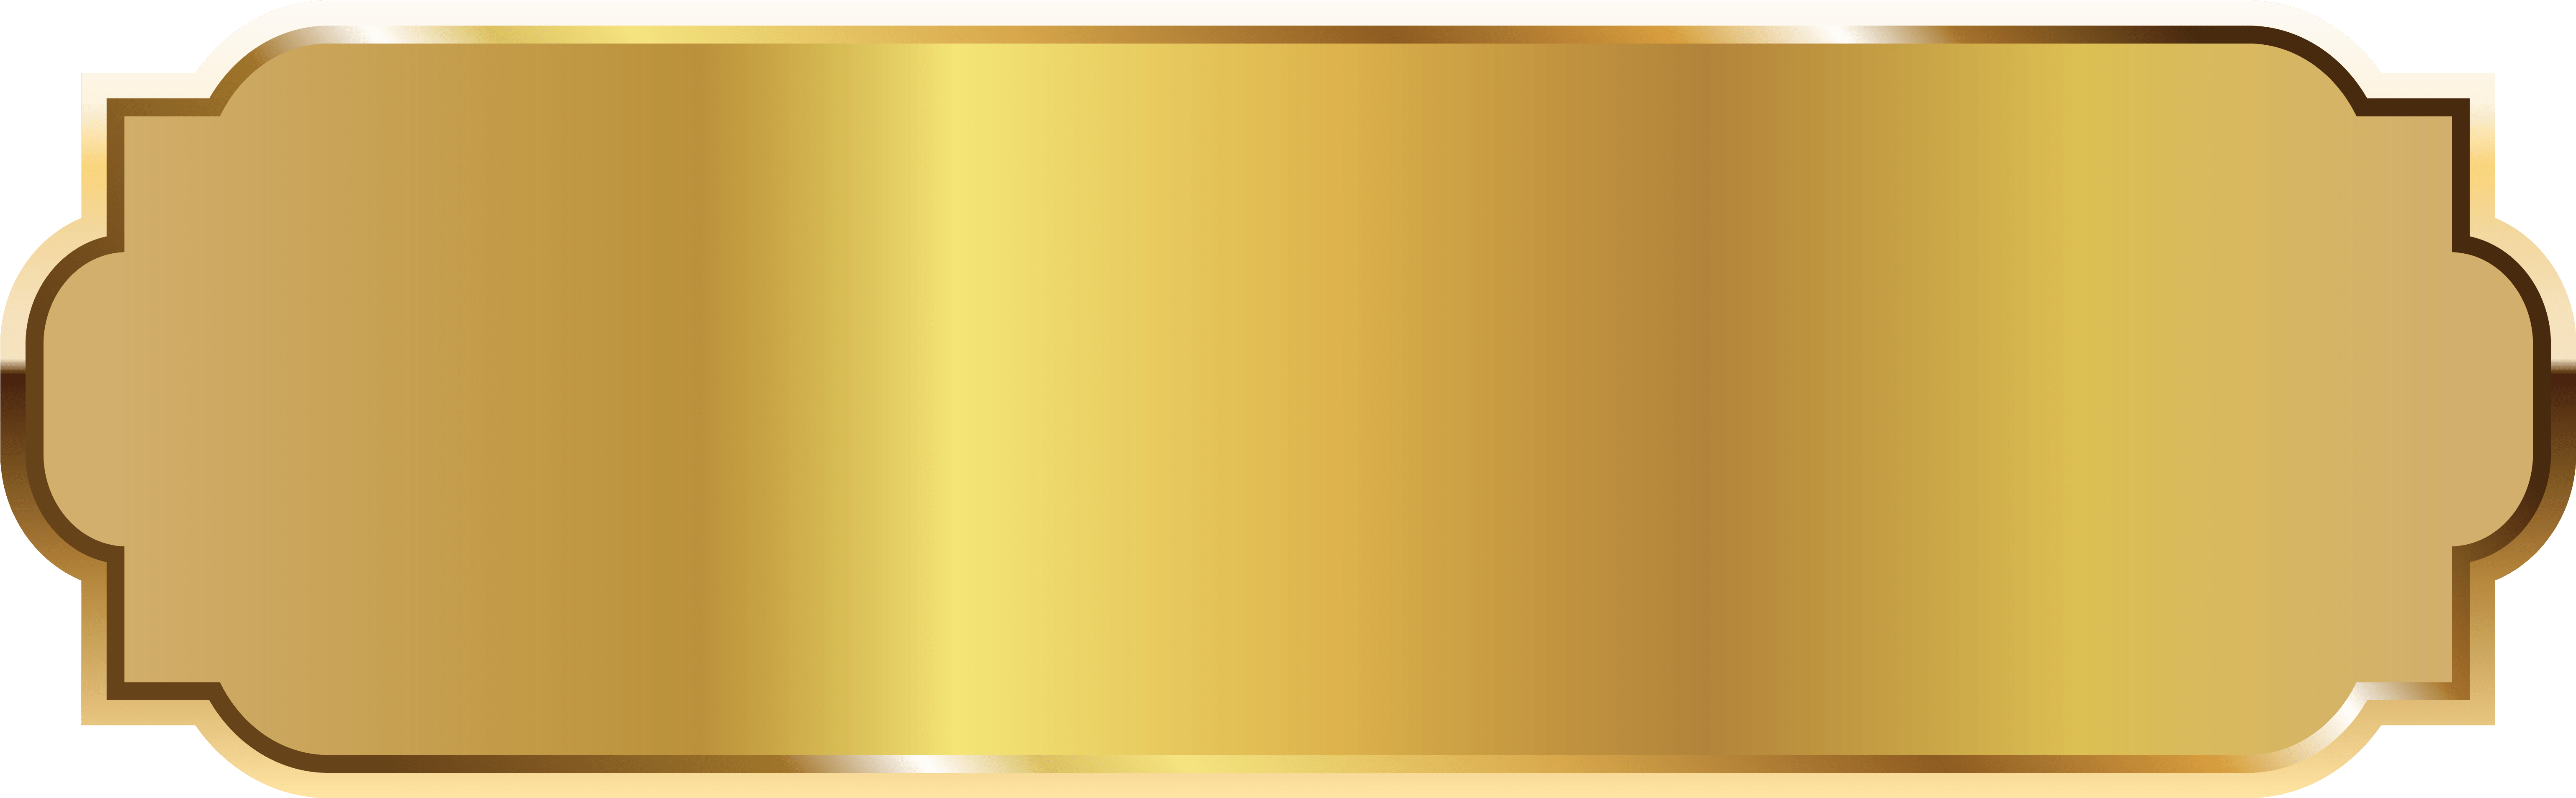 Gold Labels With Transparent Background - Template Name Png (6266x2016)